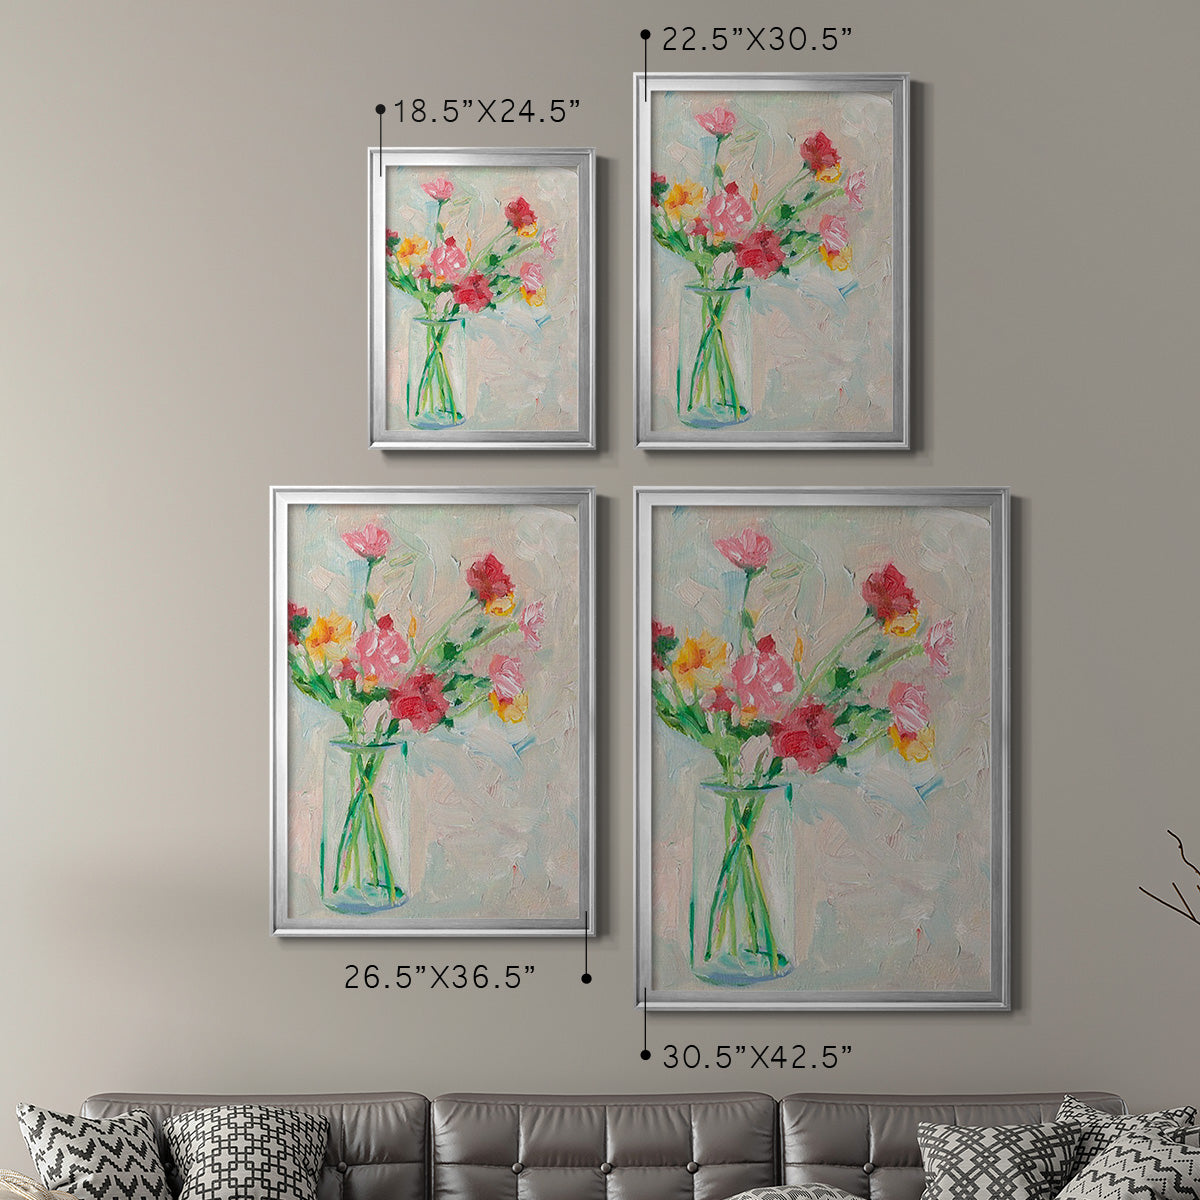 Painterly Soft Bouquet I Premium Framed Print - Ready to Hang